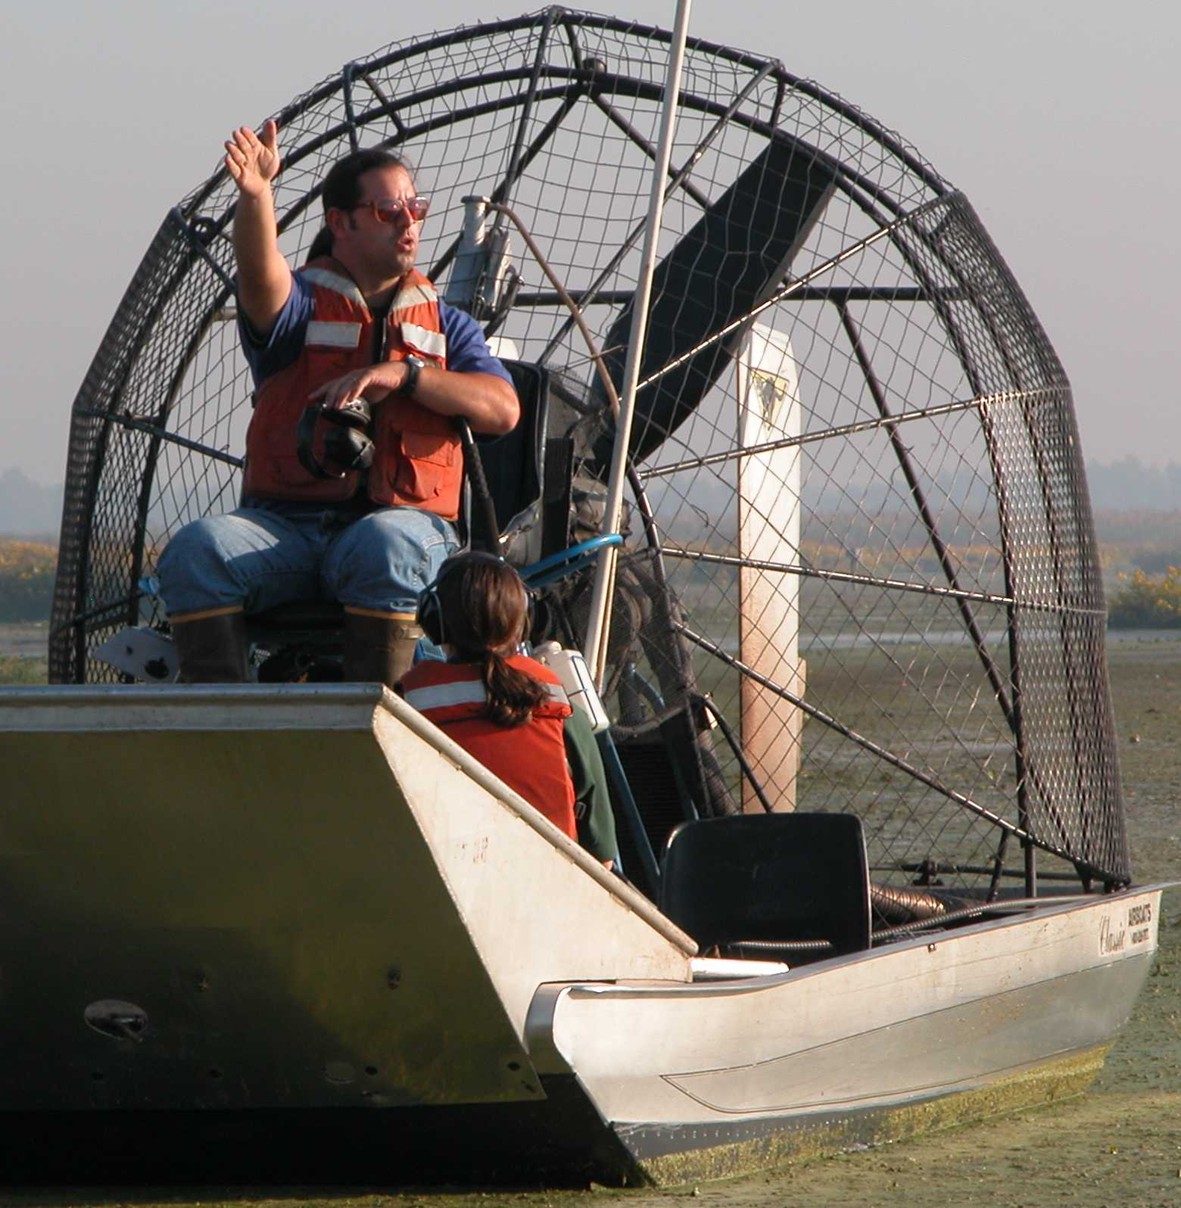 There's always a way - especially in an airboat! / photo: Serge